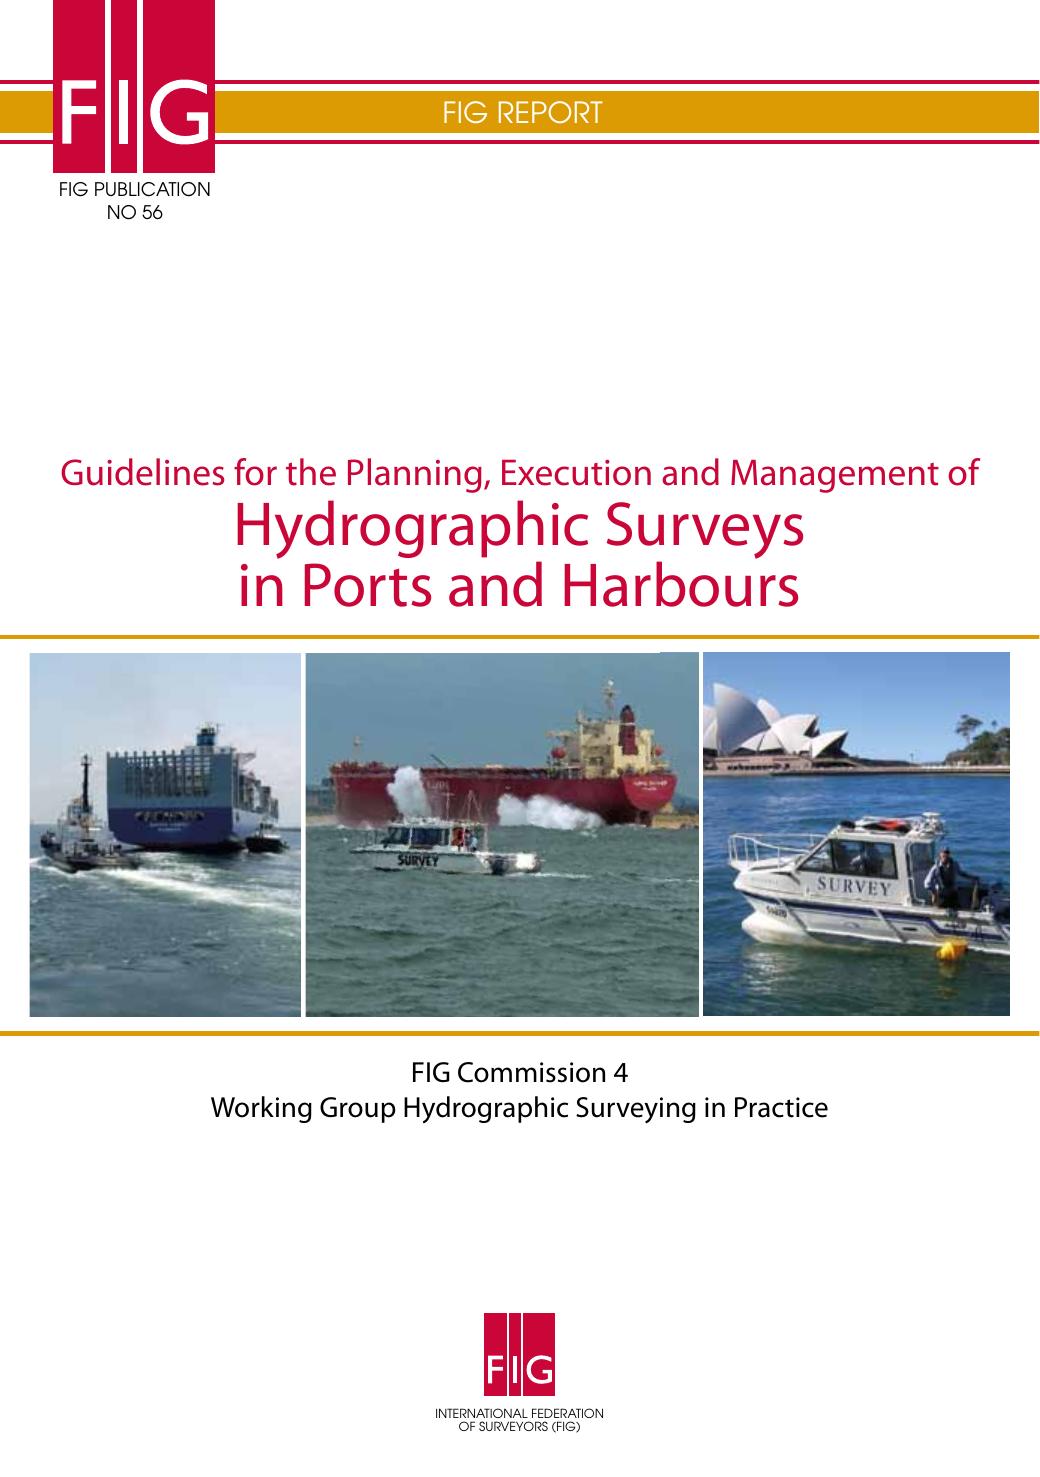 Hydrographic Surveys in Ports and Harbours 2010